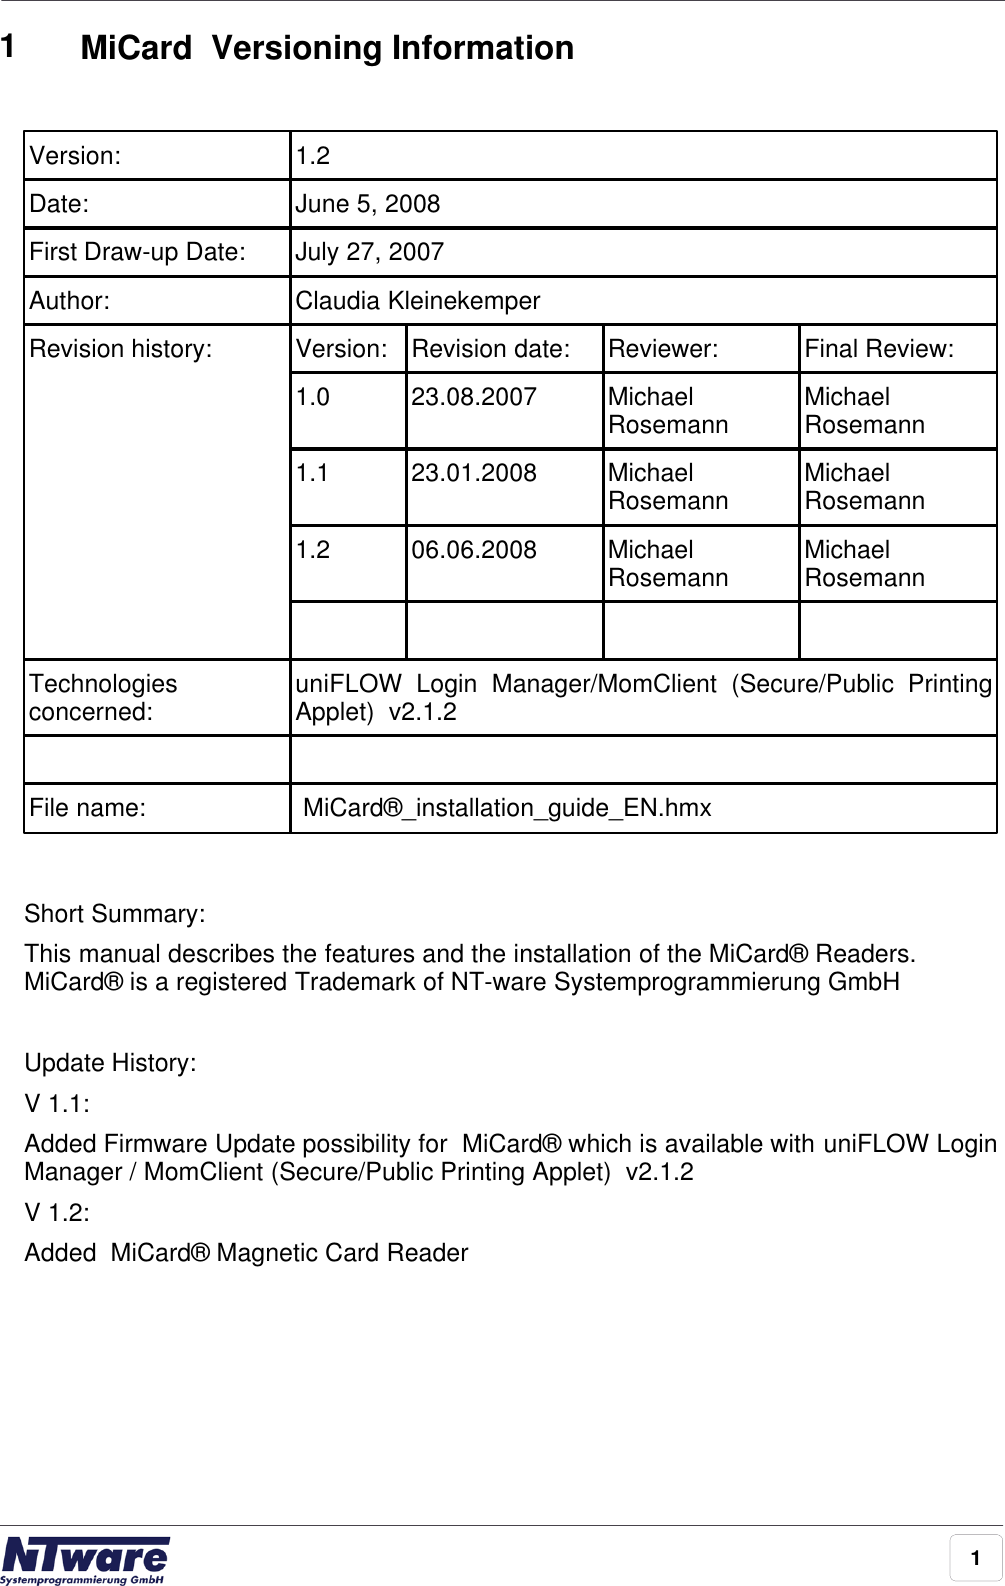 11MiCard  Versioning InformationVersion:1.2Date:June 5, 2008First Draw-up Date:July 27, 2007Author:Claudia KleinekemperRevision history:Version:Revision date:Reviewer:Final Review:1.023.08.2007MichaelRosemannMichaelRosemann1.123.01.2008MichaelRosemannMichaelRosemann1.206.06.2008MichaelRosemannMichaelRosemannTechnologiesconcerned:uniFLOW  Login  Manager/MomClient  (Secure/Public  PrintingApplet)  v2.1.2File name: MiCard®_installation_guide_EN.hmxShort Summary:This manual describes the features and the installation of the MiCard® Readers.MiCard® is a registered Trademark of NT-ware Systemprogrammierung GmbH Update History:V 1.1: Added Firmware Update possibility for  MiCard® which is available with uniFLOW LoginManager / MomClient (Secure/Public Printing Applet)  v2.1.2 V 1.2: Added  MiCard® Magnetic Card Reader